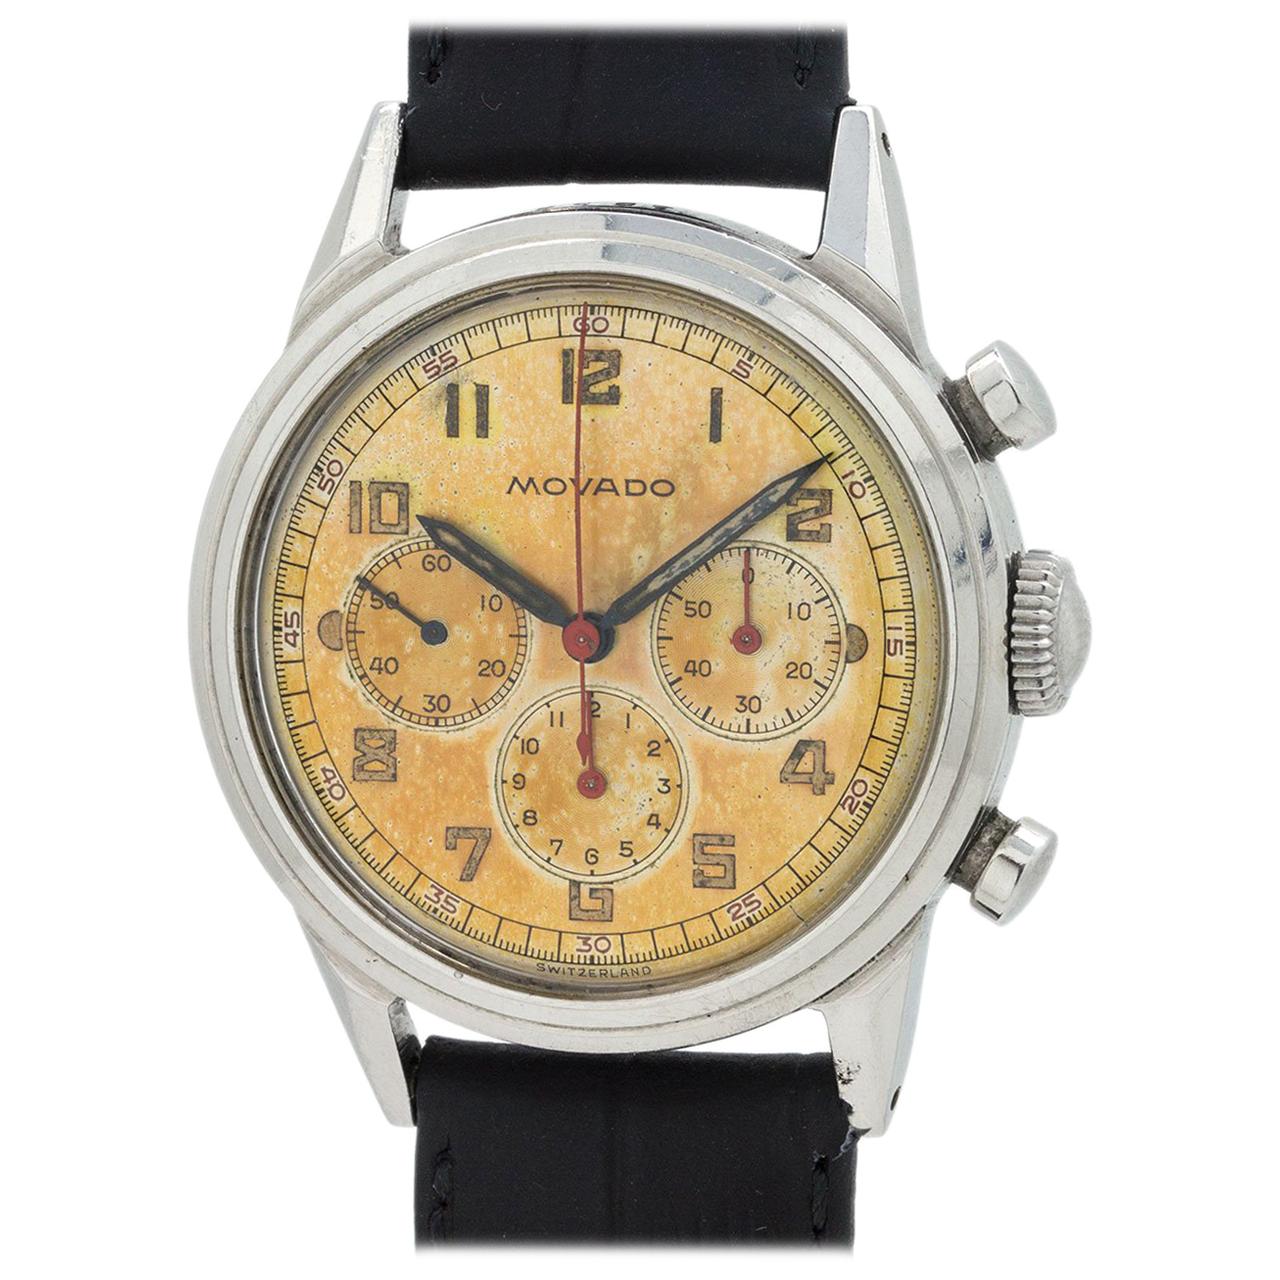 Movado Chronograph Waterproof Design Stainless Steel, circa 1950s